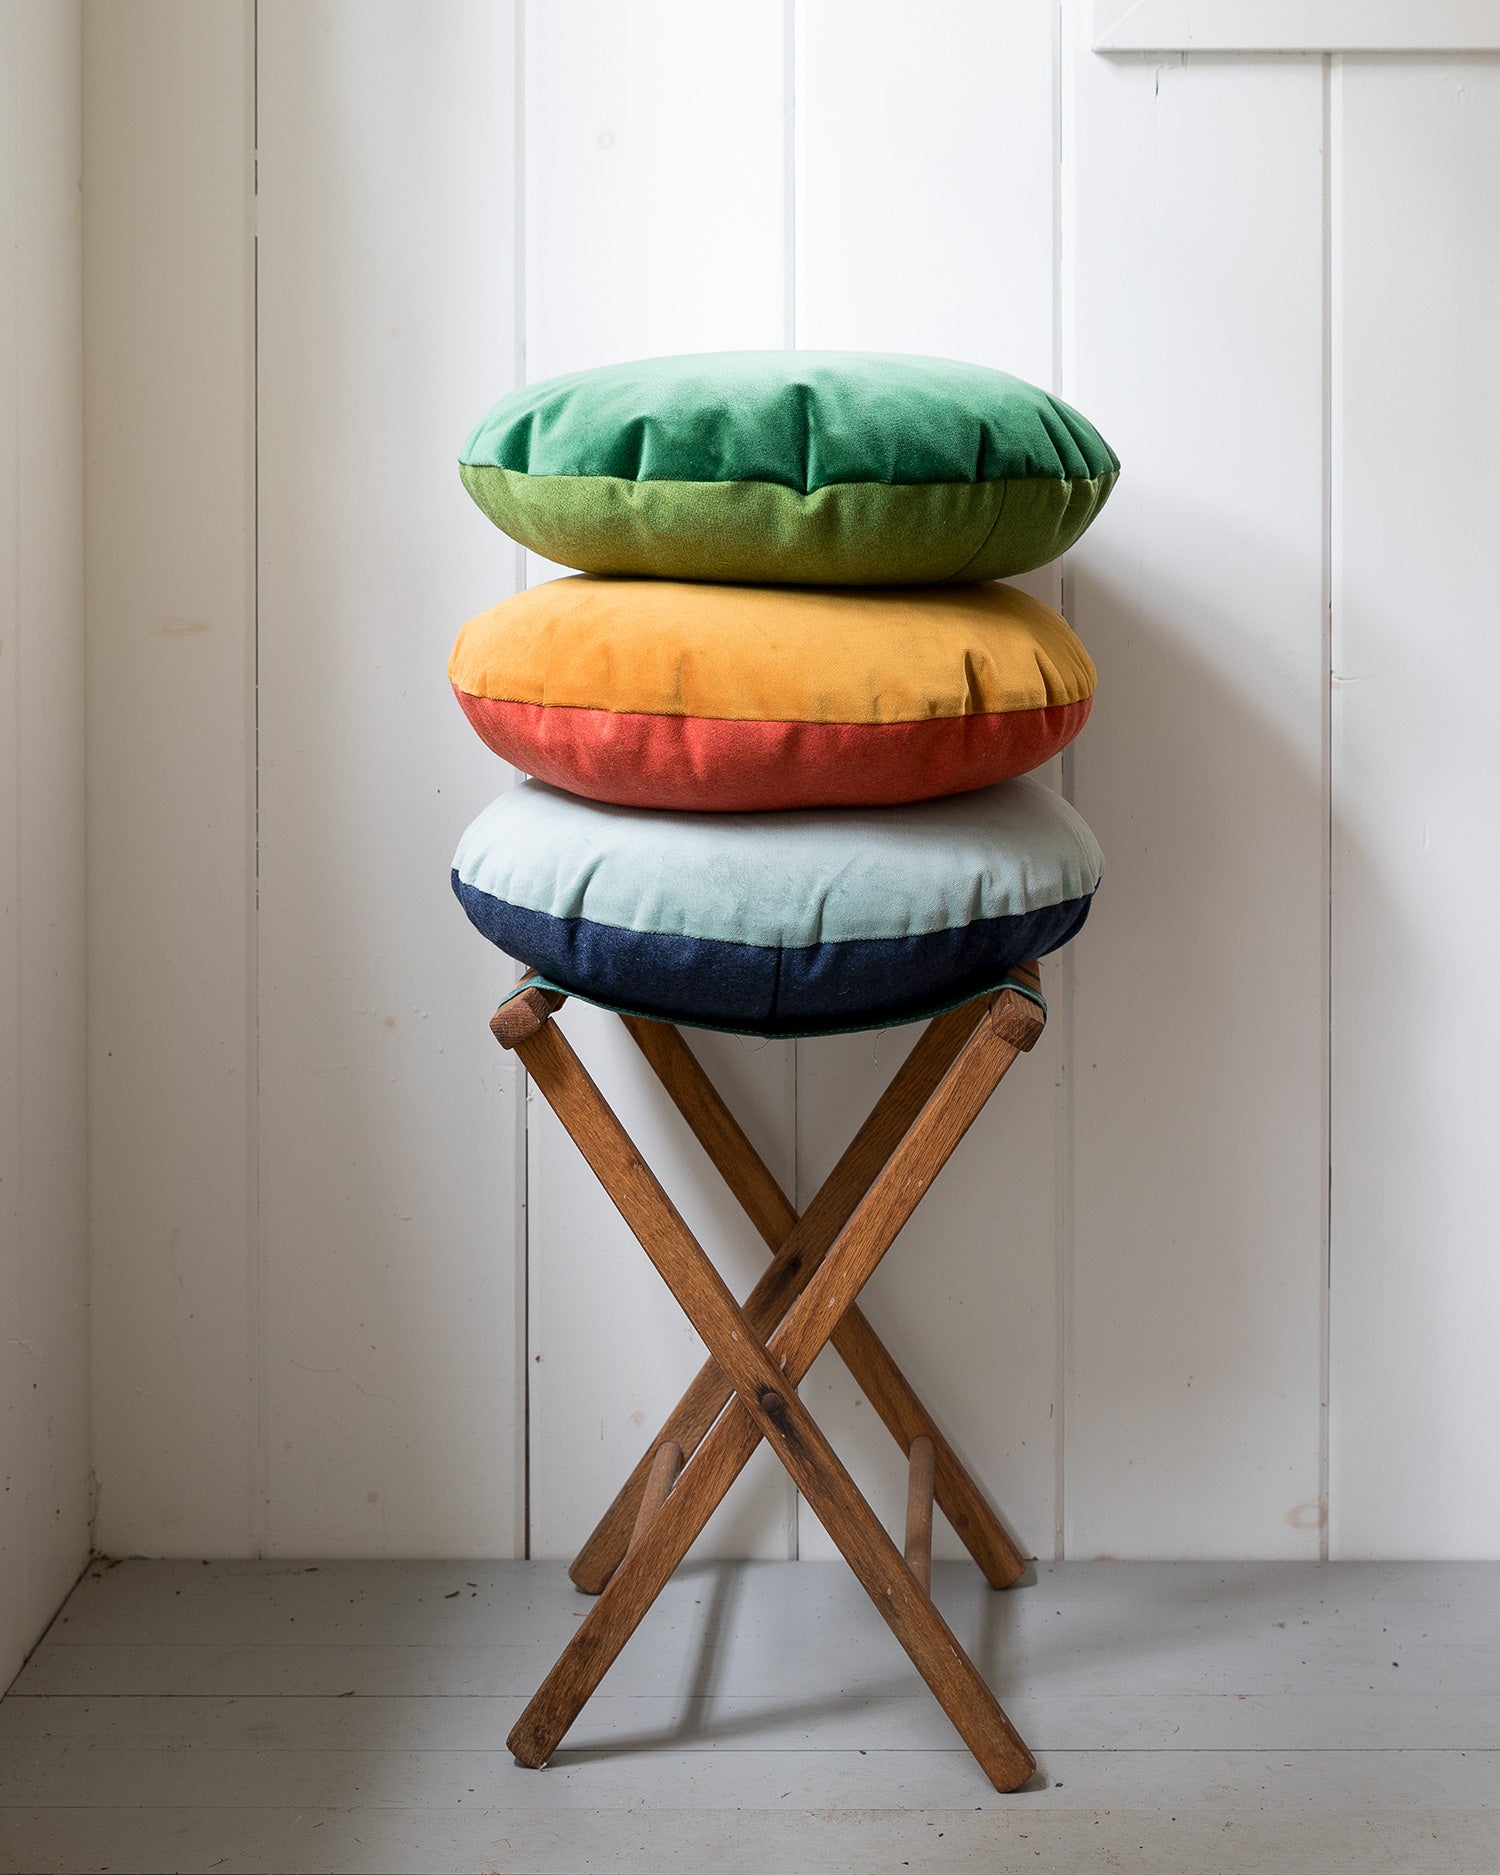 stool with a stack of round pillows on it